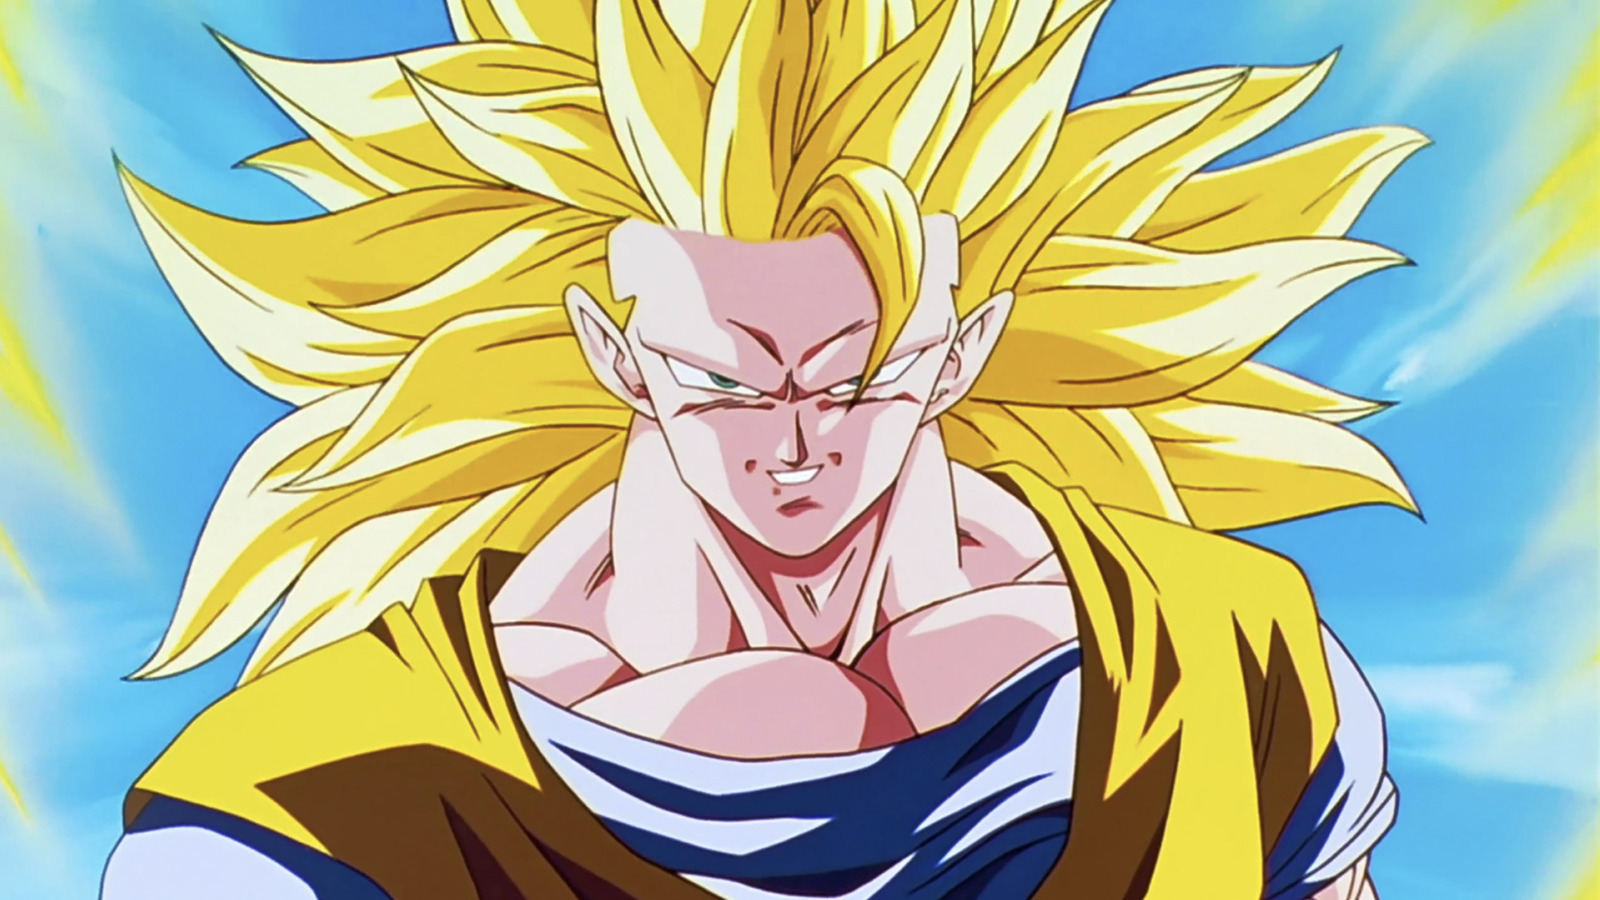 Super Saiyan 3 Was A Struggle To Draw For Dragon Ball Z (And It's Not ...